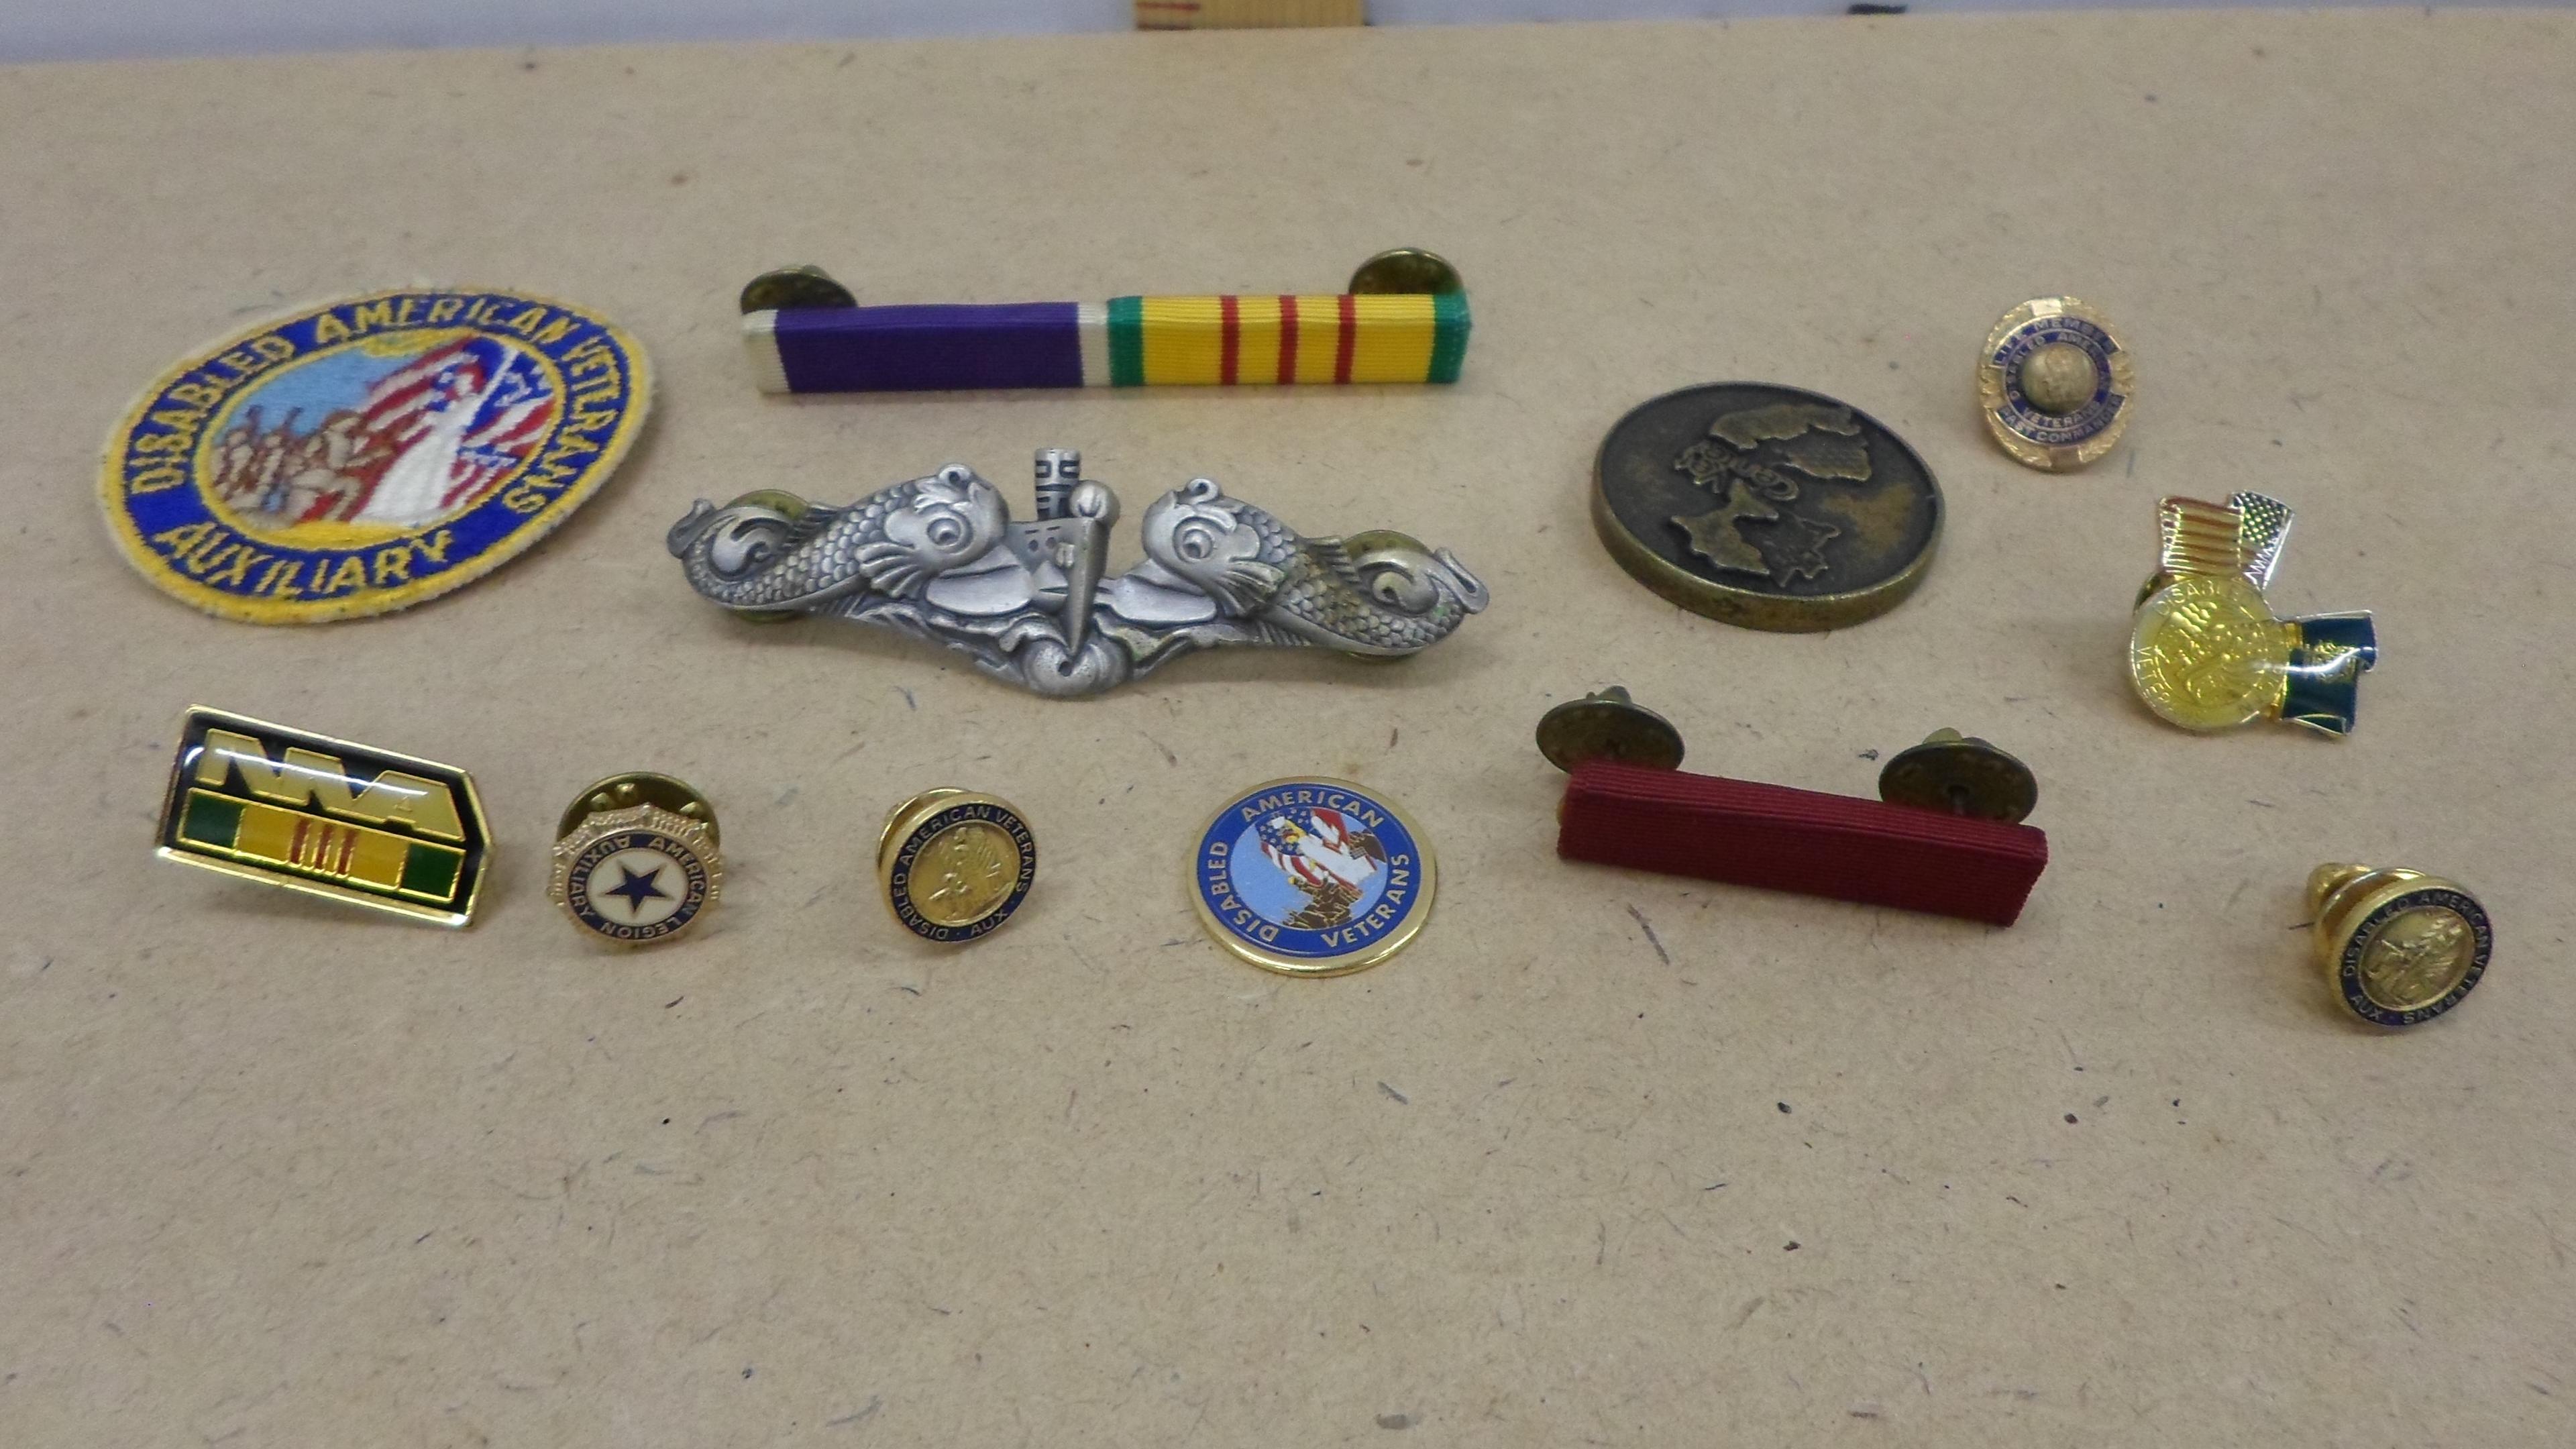 military pins and medals, vintage pins and medals from the US army and navy